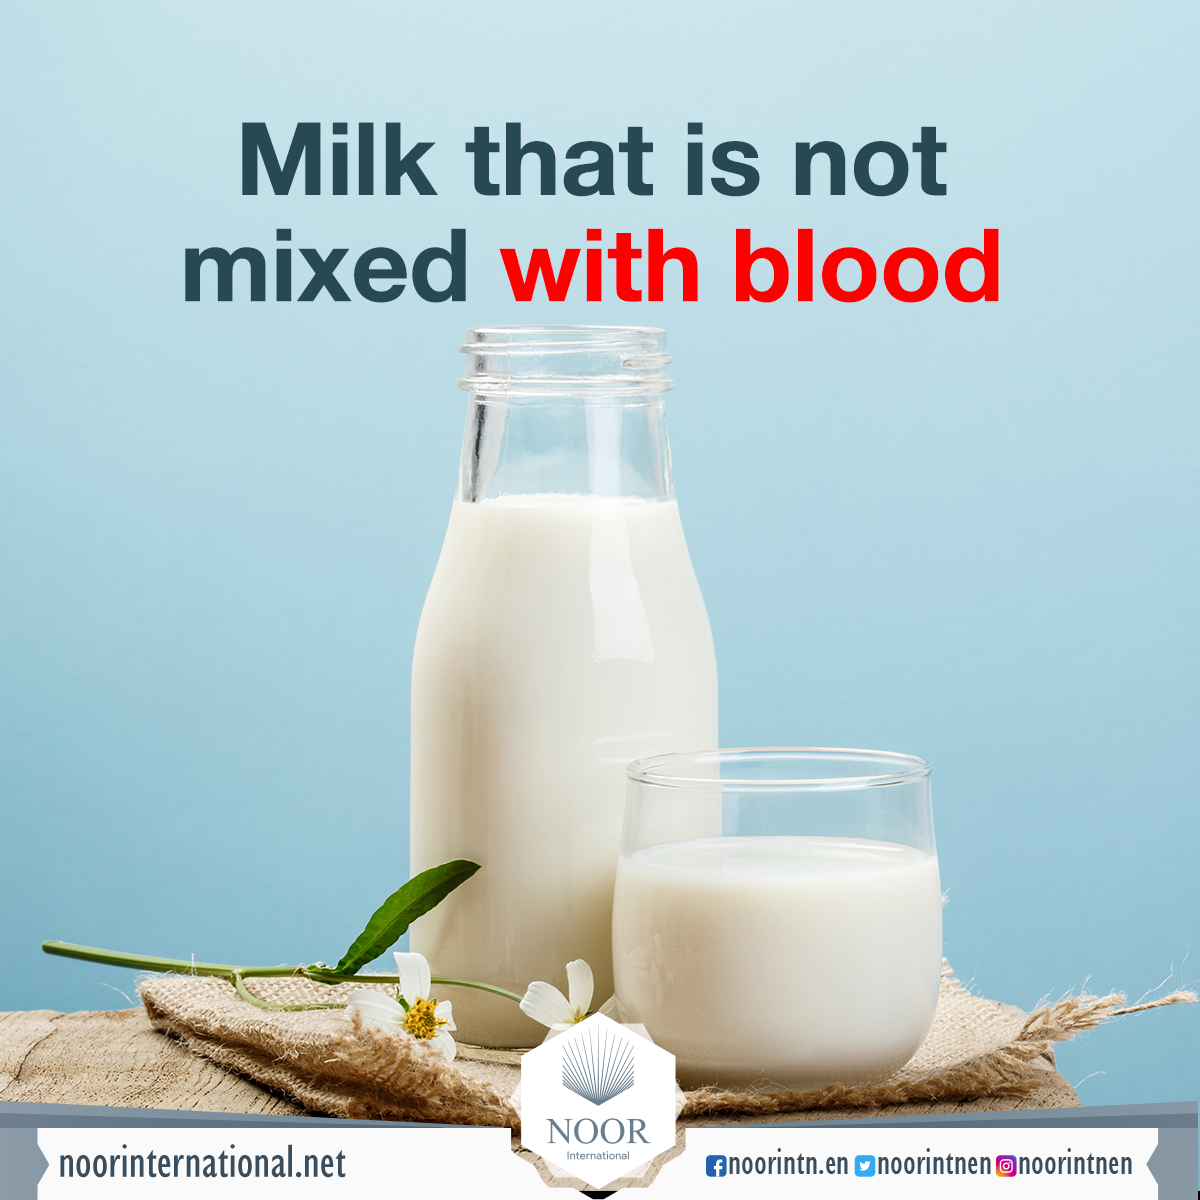 Milk that is not mixed with blood